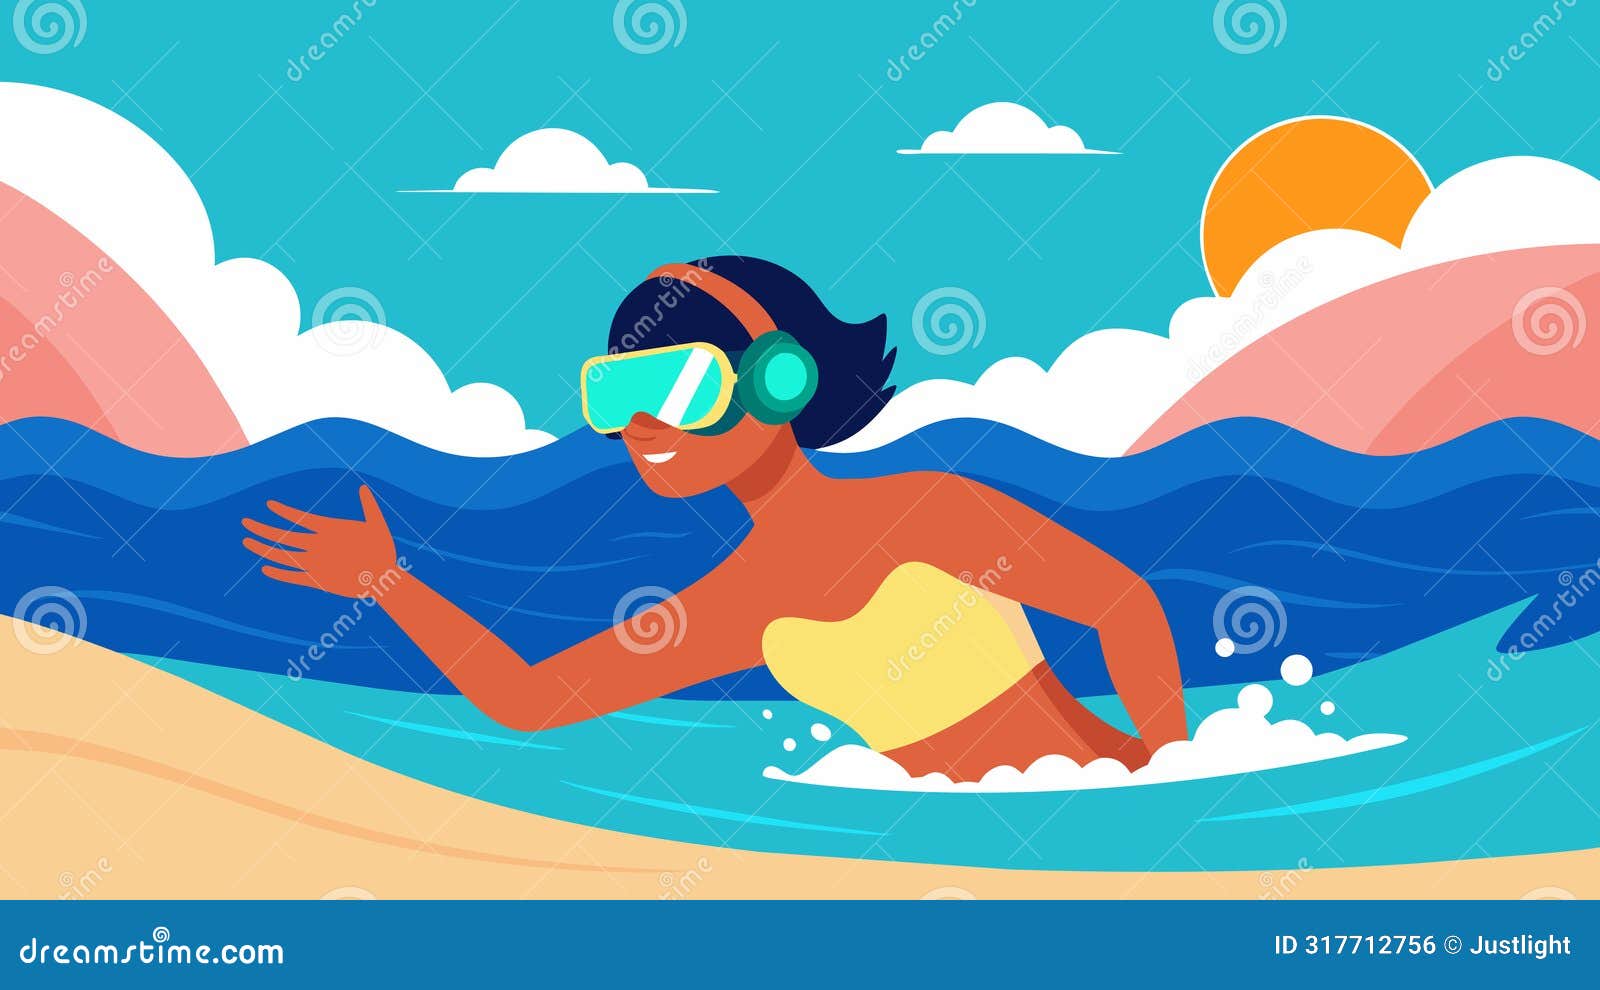 at a beach a person uses a vr headset to swim laps in a virtual ocean timed with the sound of calming waves.. 